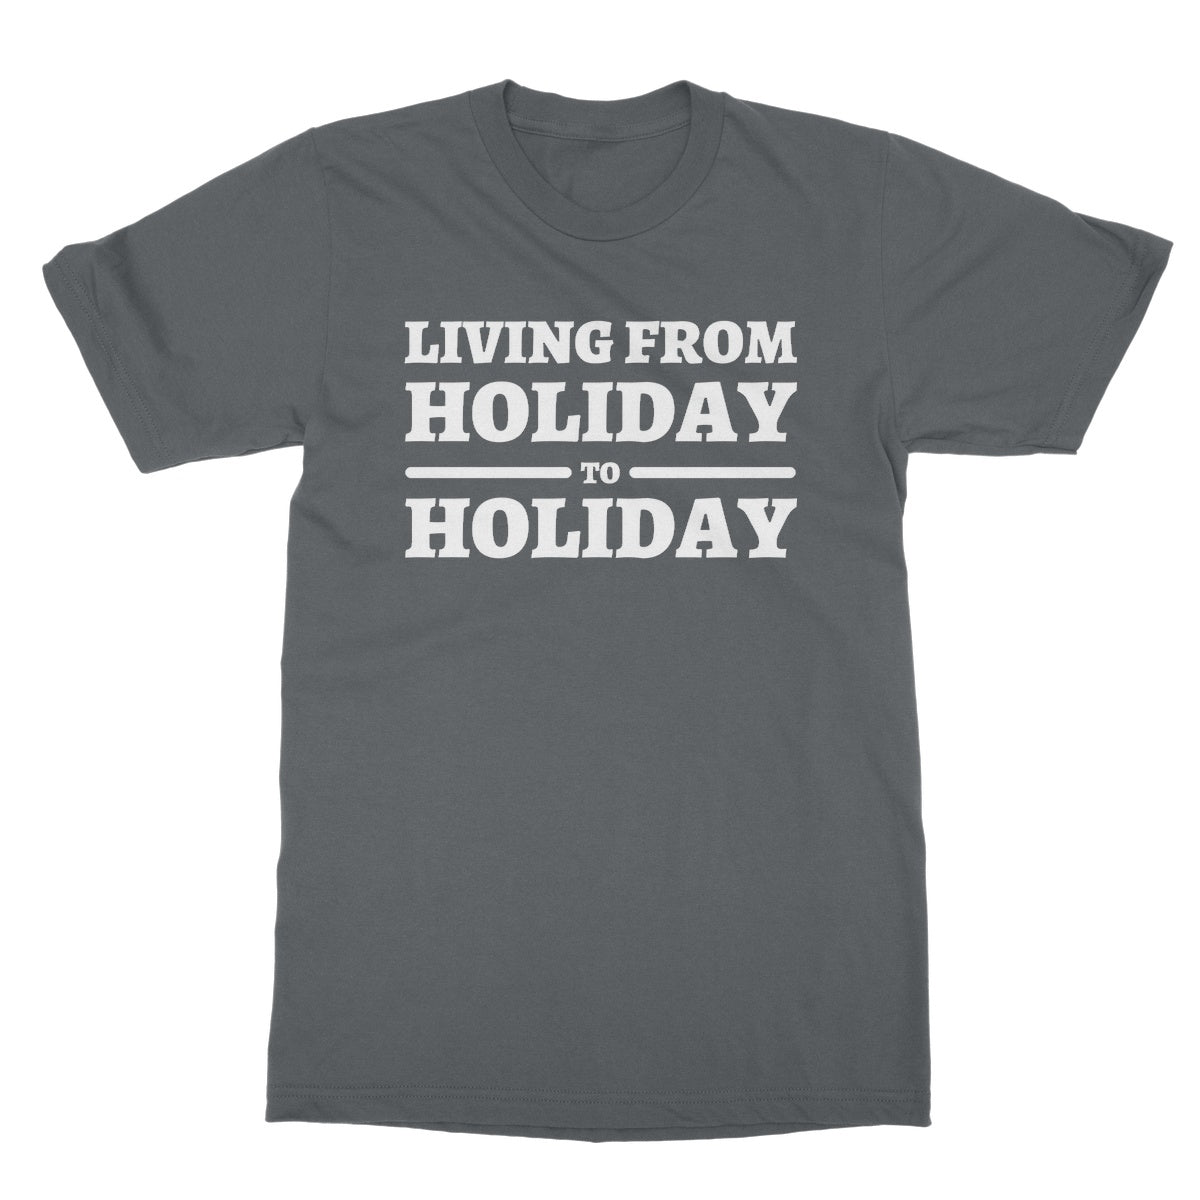 living from holiday to holiday t shirt grey